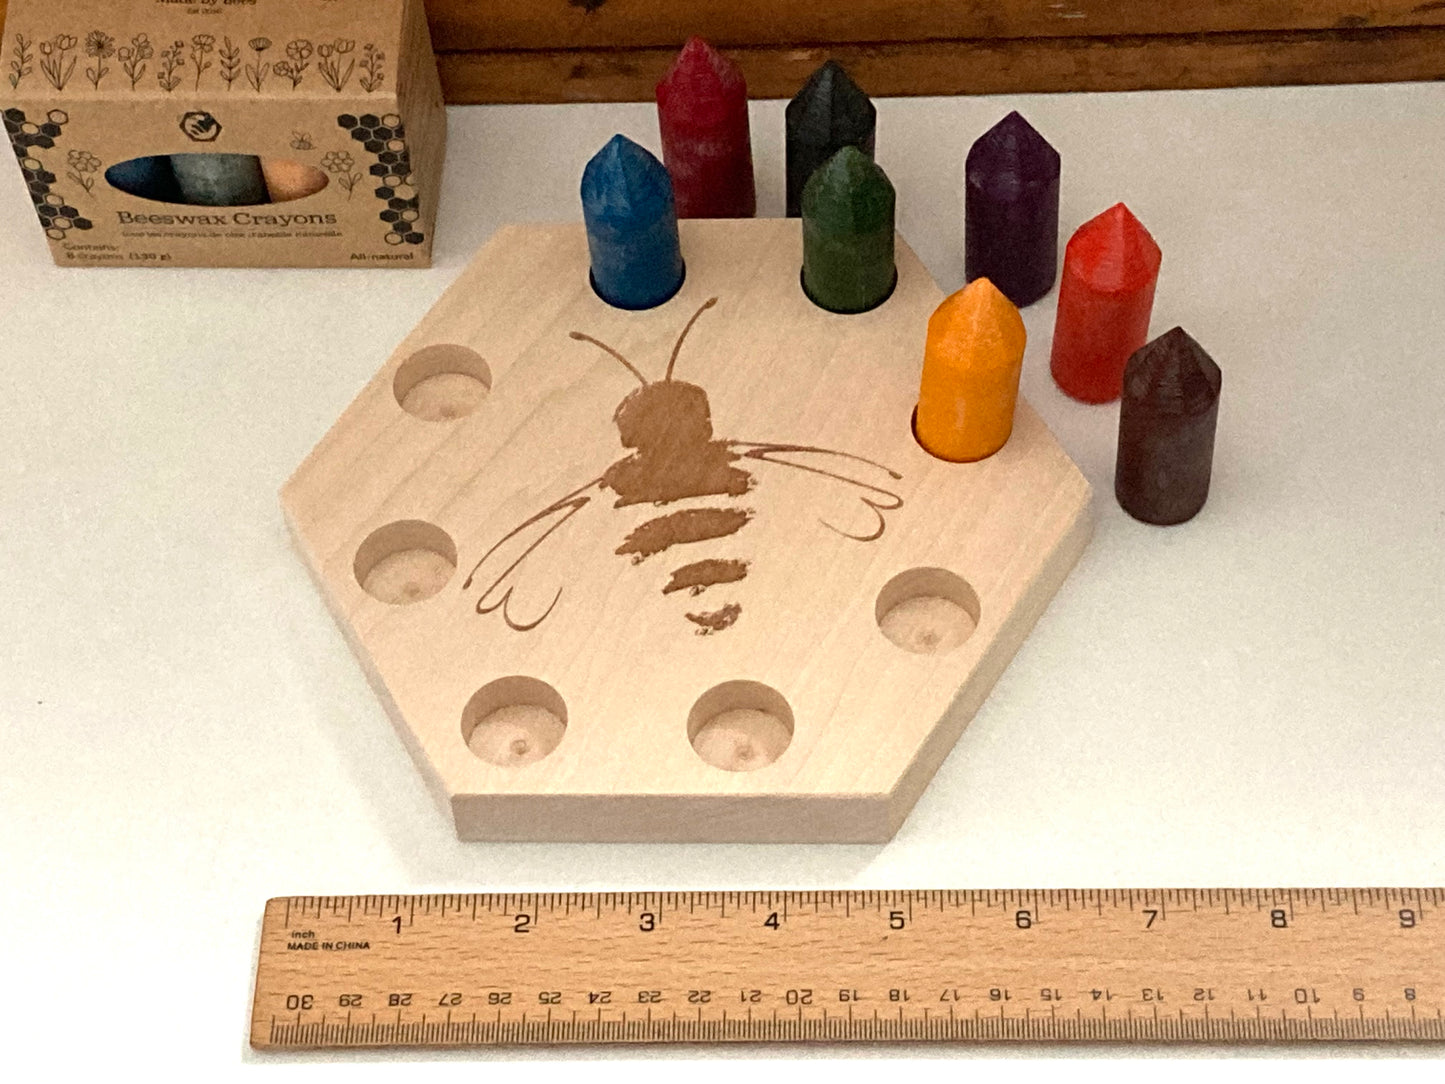 Beeswax Crayons, Art - WOODEN CADDY, for 8 crayons!